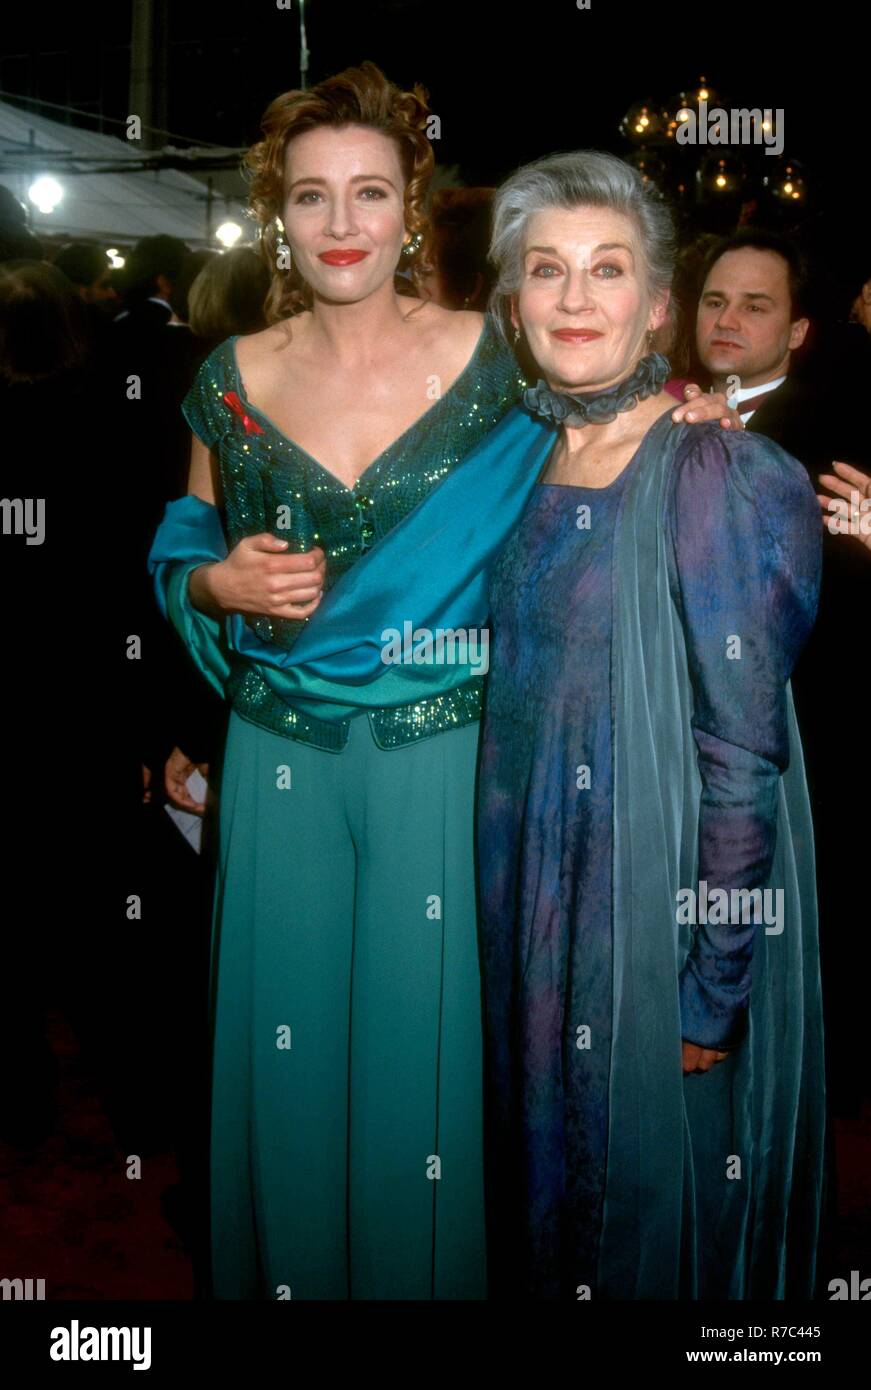 LOS ANGELES, CA - MARCH 29: Actress Emma Thompson and mother Phyllida Law attend the 65th Annual Academy Awards on March 29, 1993 at the Dorothy Chandler Pavilion in Los Angeles, California. Photo by Barry King/Alamy Stock Photo Stock Photo